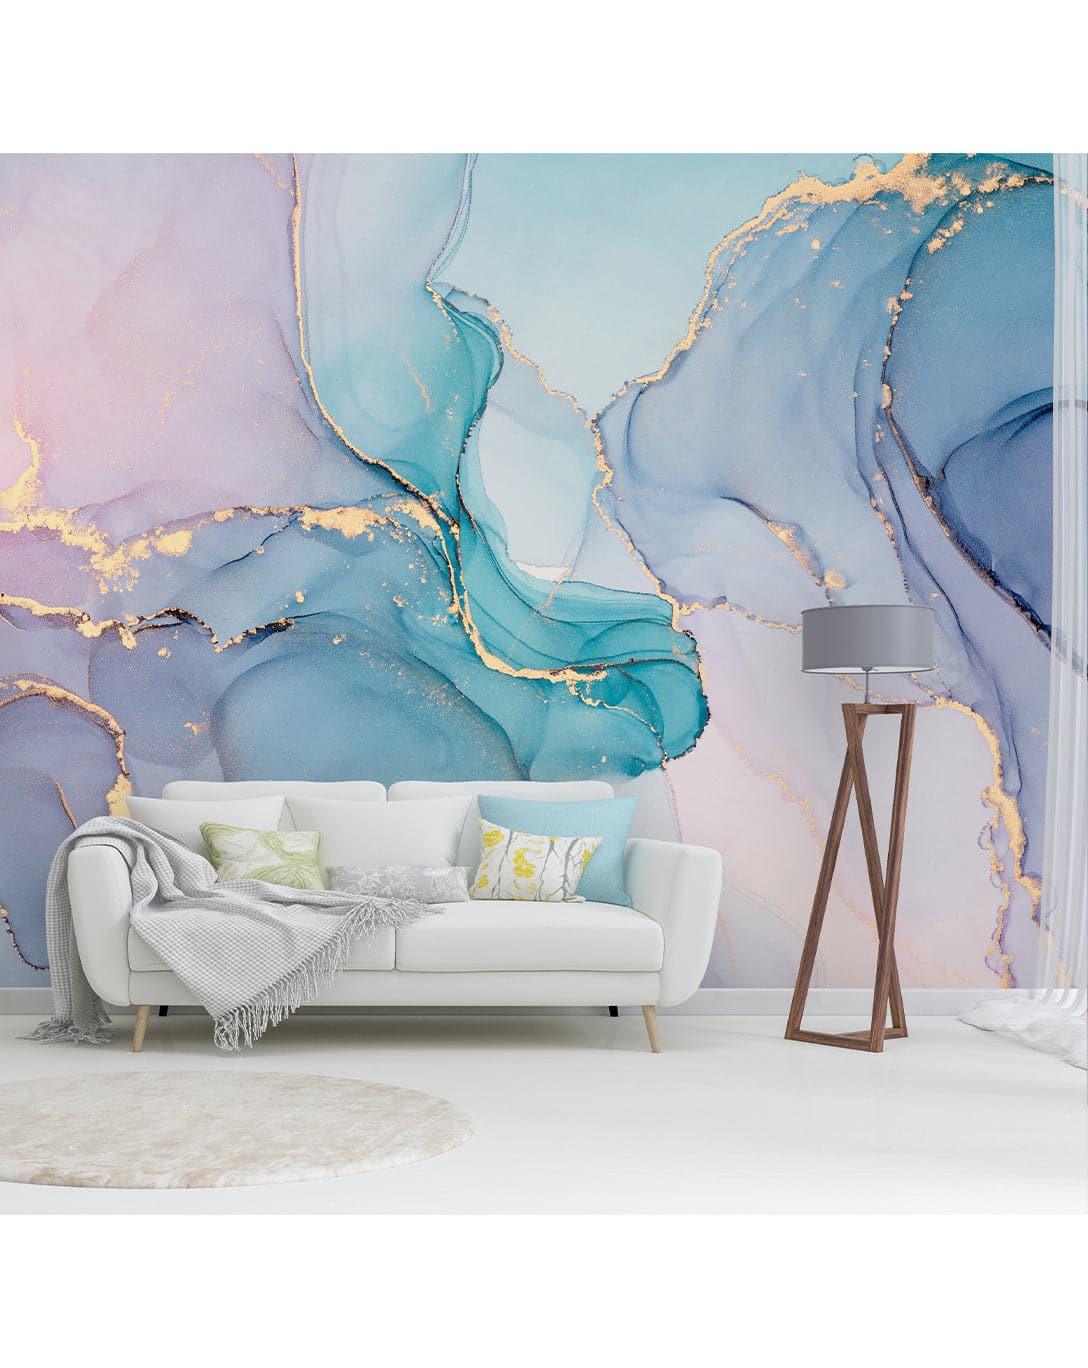 Watercolor Alcohol Ink Pink Blue Purple Wall Mural Watercolor Alcohol Ink Pink Blue Purple Wall Mural Watercolor Alcohol Ink Pink Blue Purple Wall Mural 